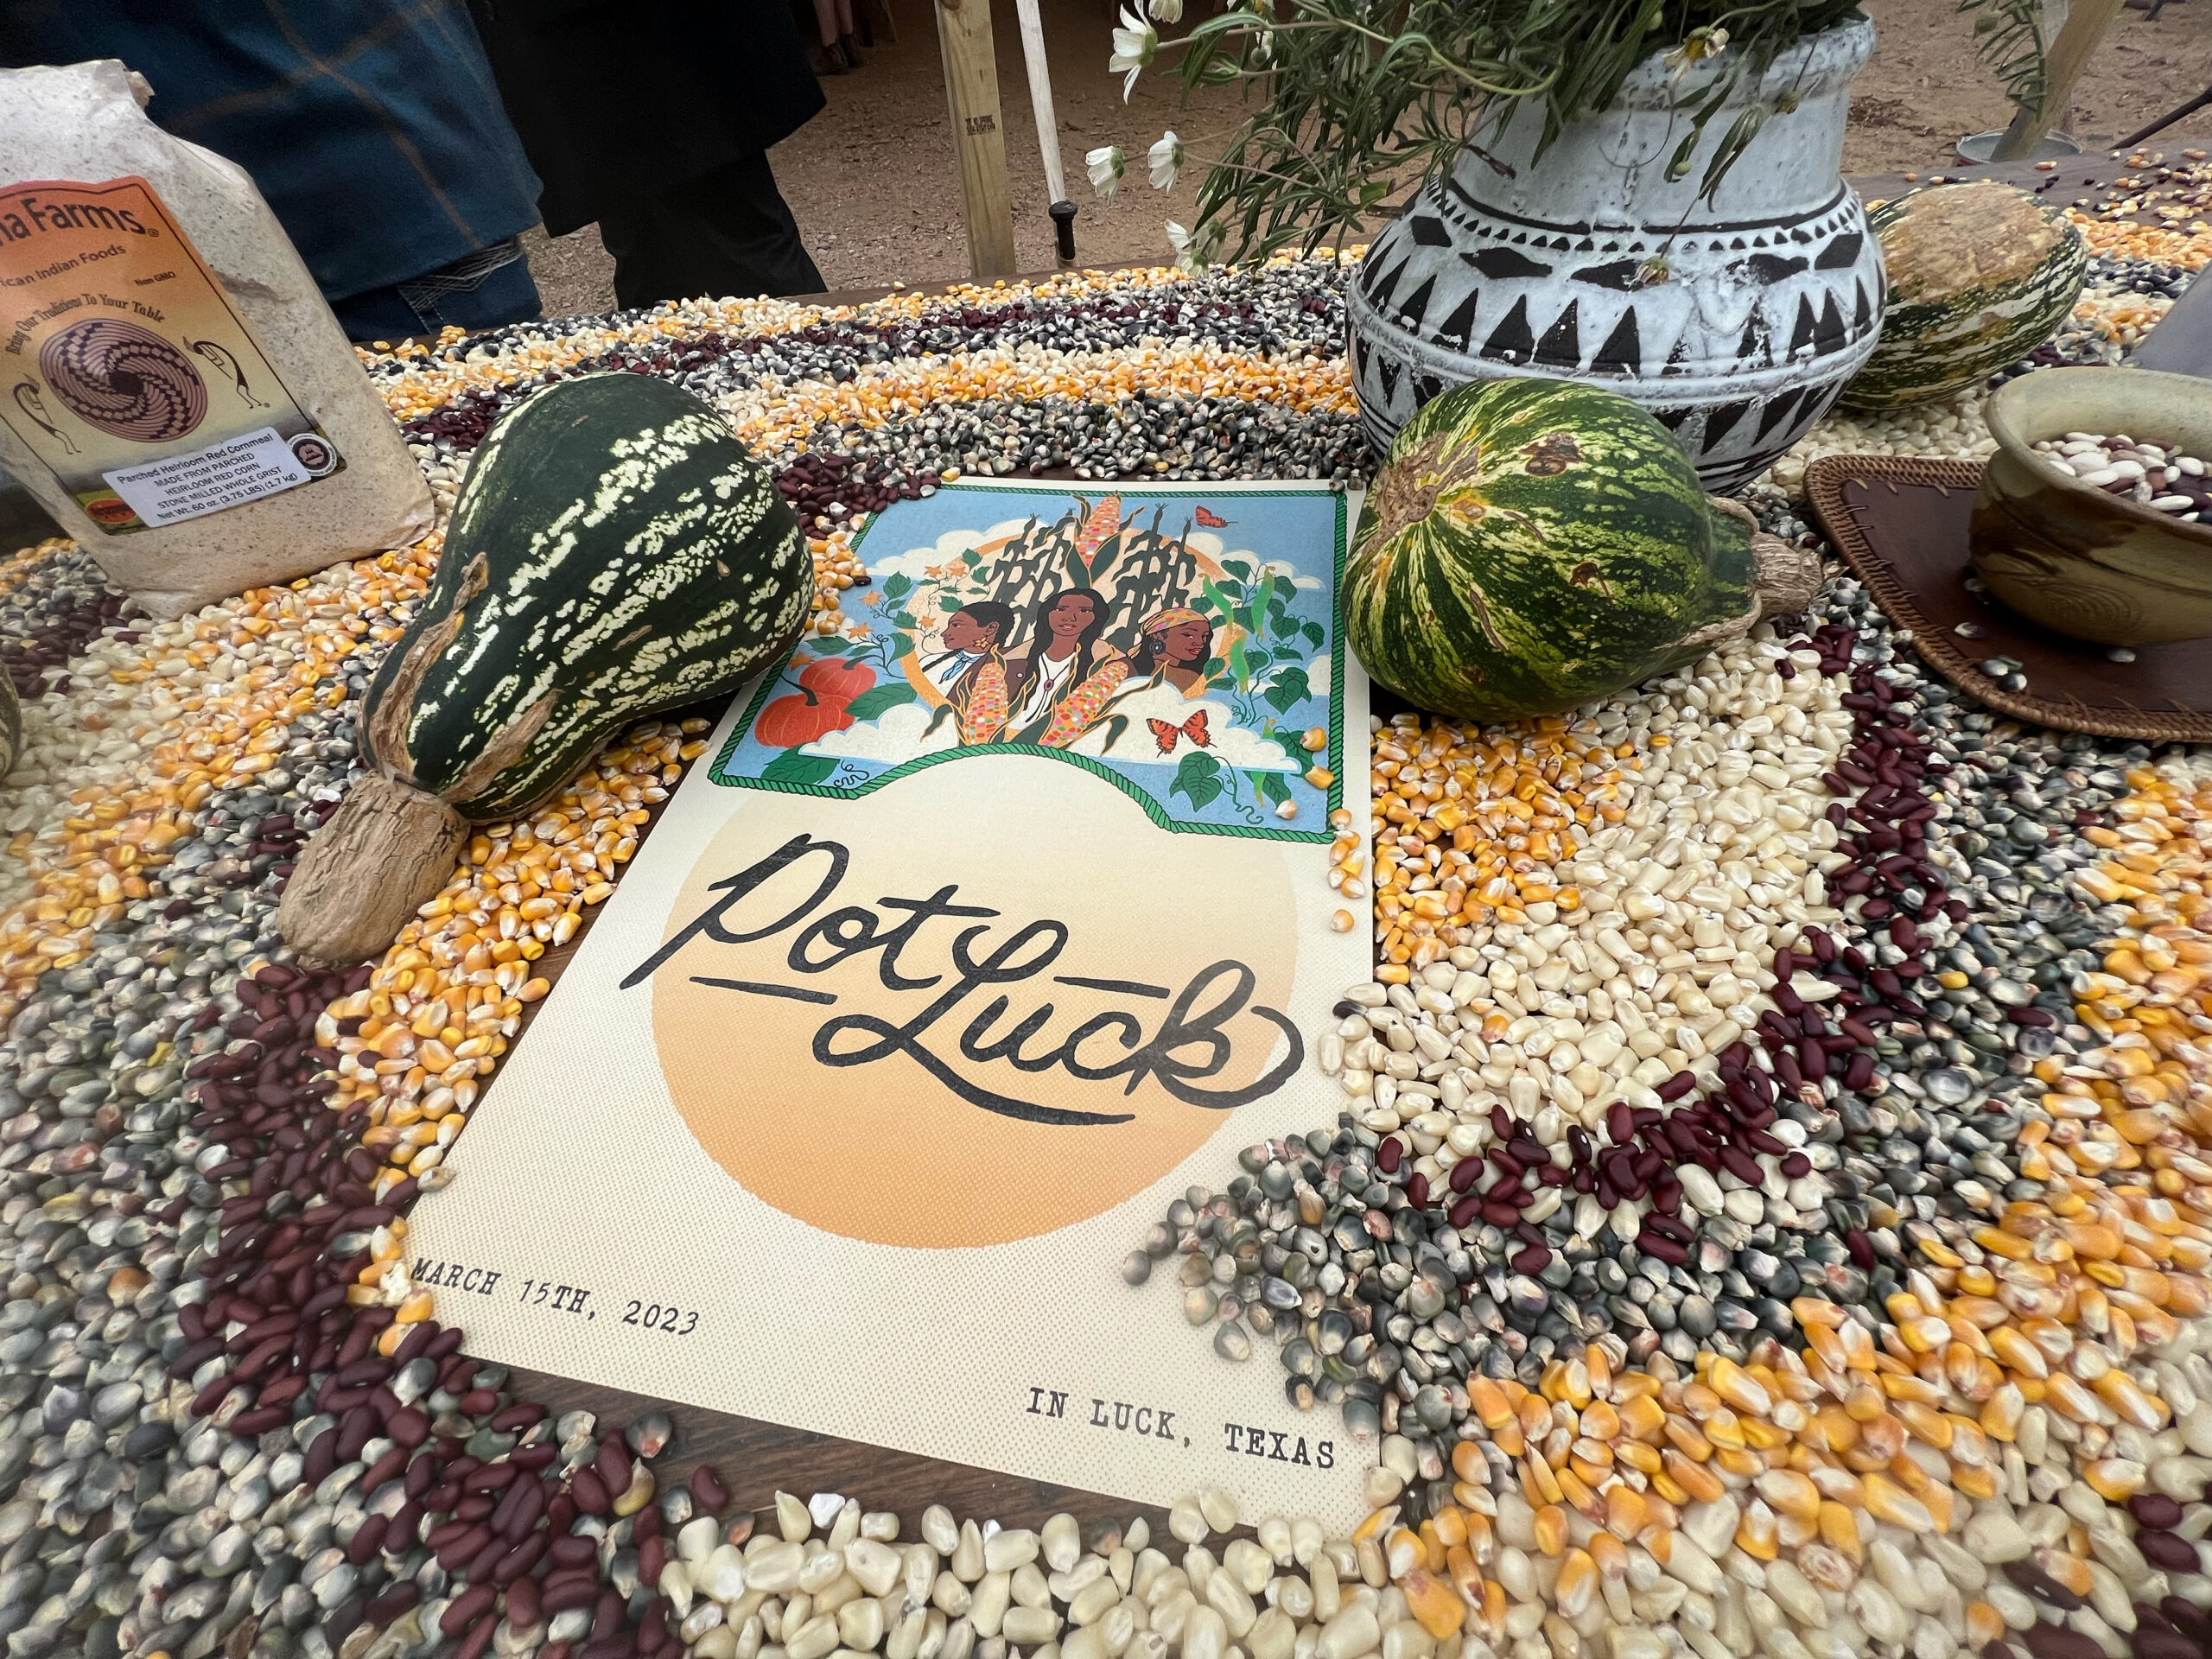 The Potluck 2023 poster sits on a table in pamphlet form, surrounded by beans and corn of a variety of colors as well as a couple of gourds. The poster shows an artists depiction of the Three Sisters food staples in crop form: corn, crawling beans and squash.